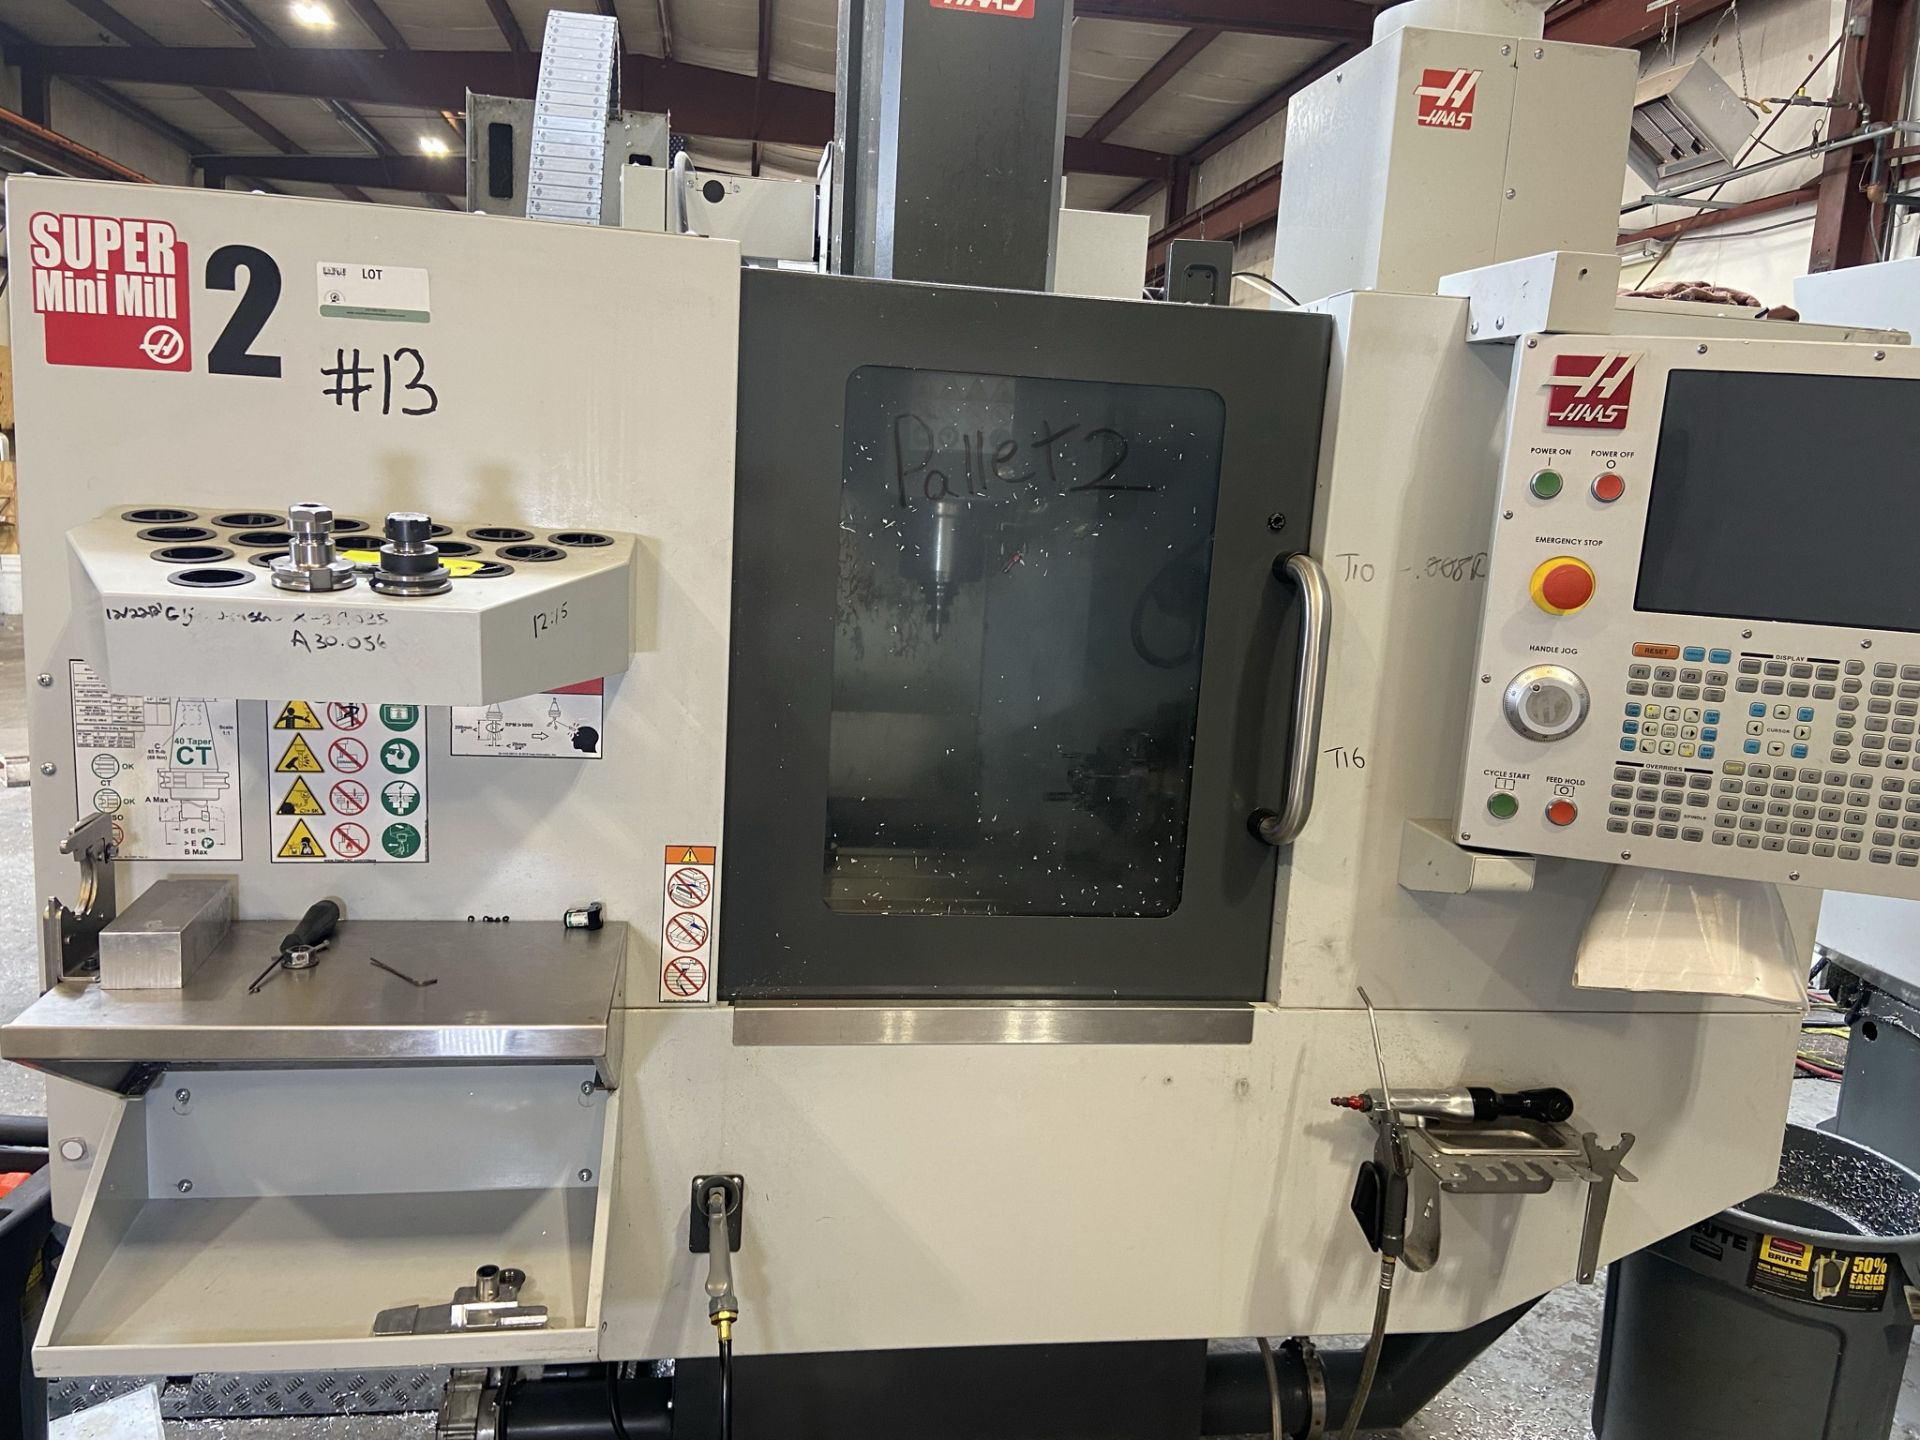 2021 HAAS SUPER MINI MILL 2 4-Axis CNC Vertical Machining Center - Image 2 of 10